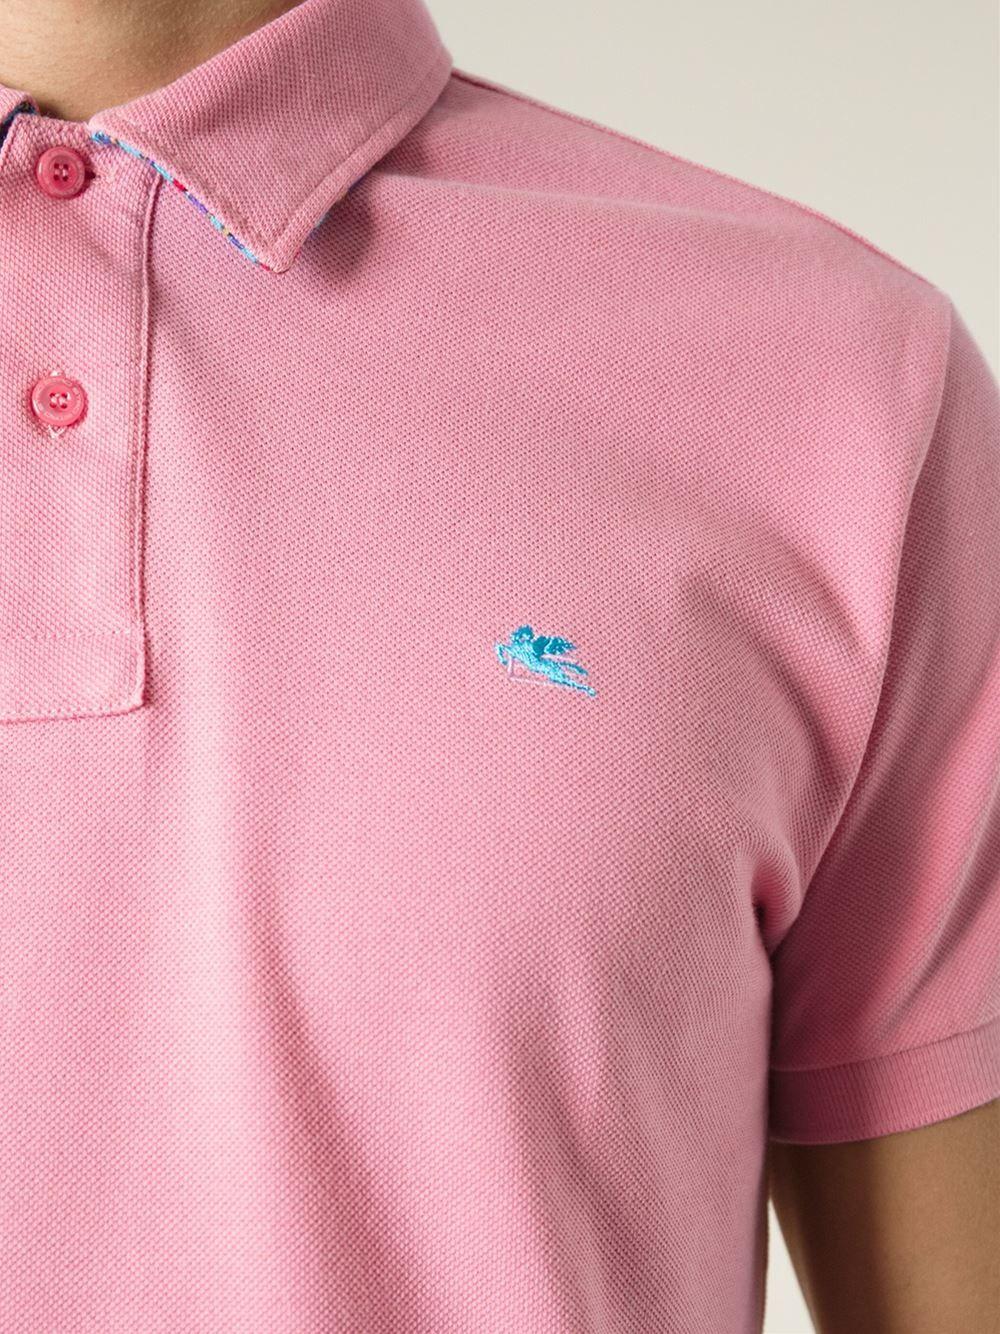 Etro Logo - Etro Logo-Embroidered Polo Shirt in Pink for Men - Lyst